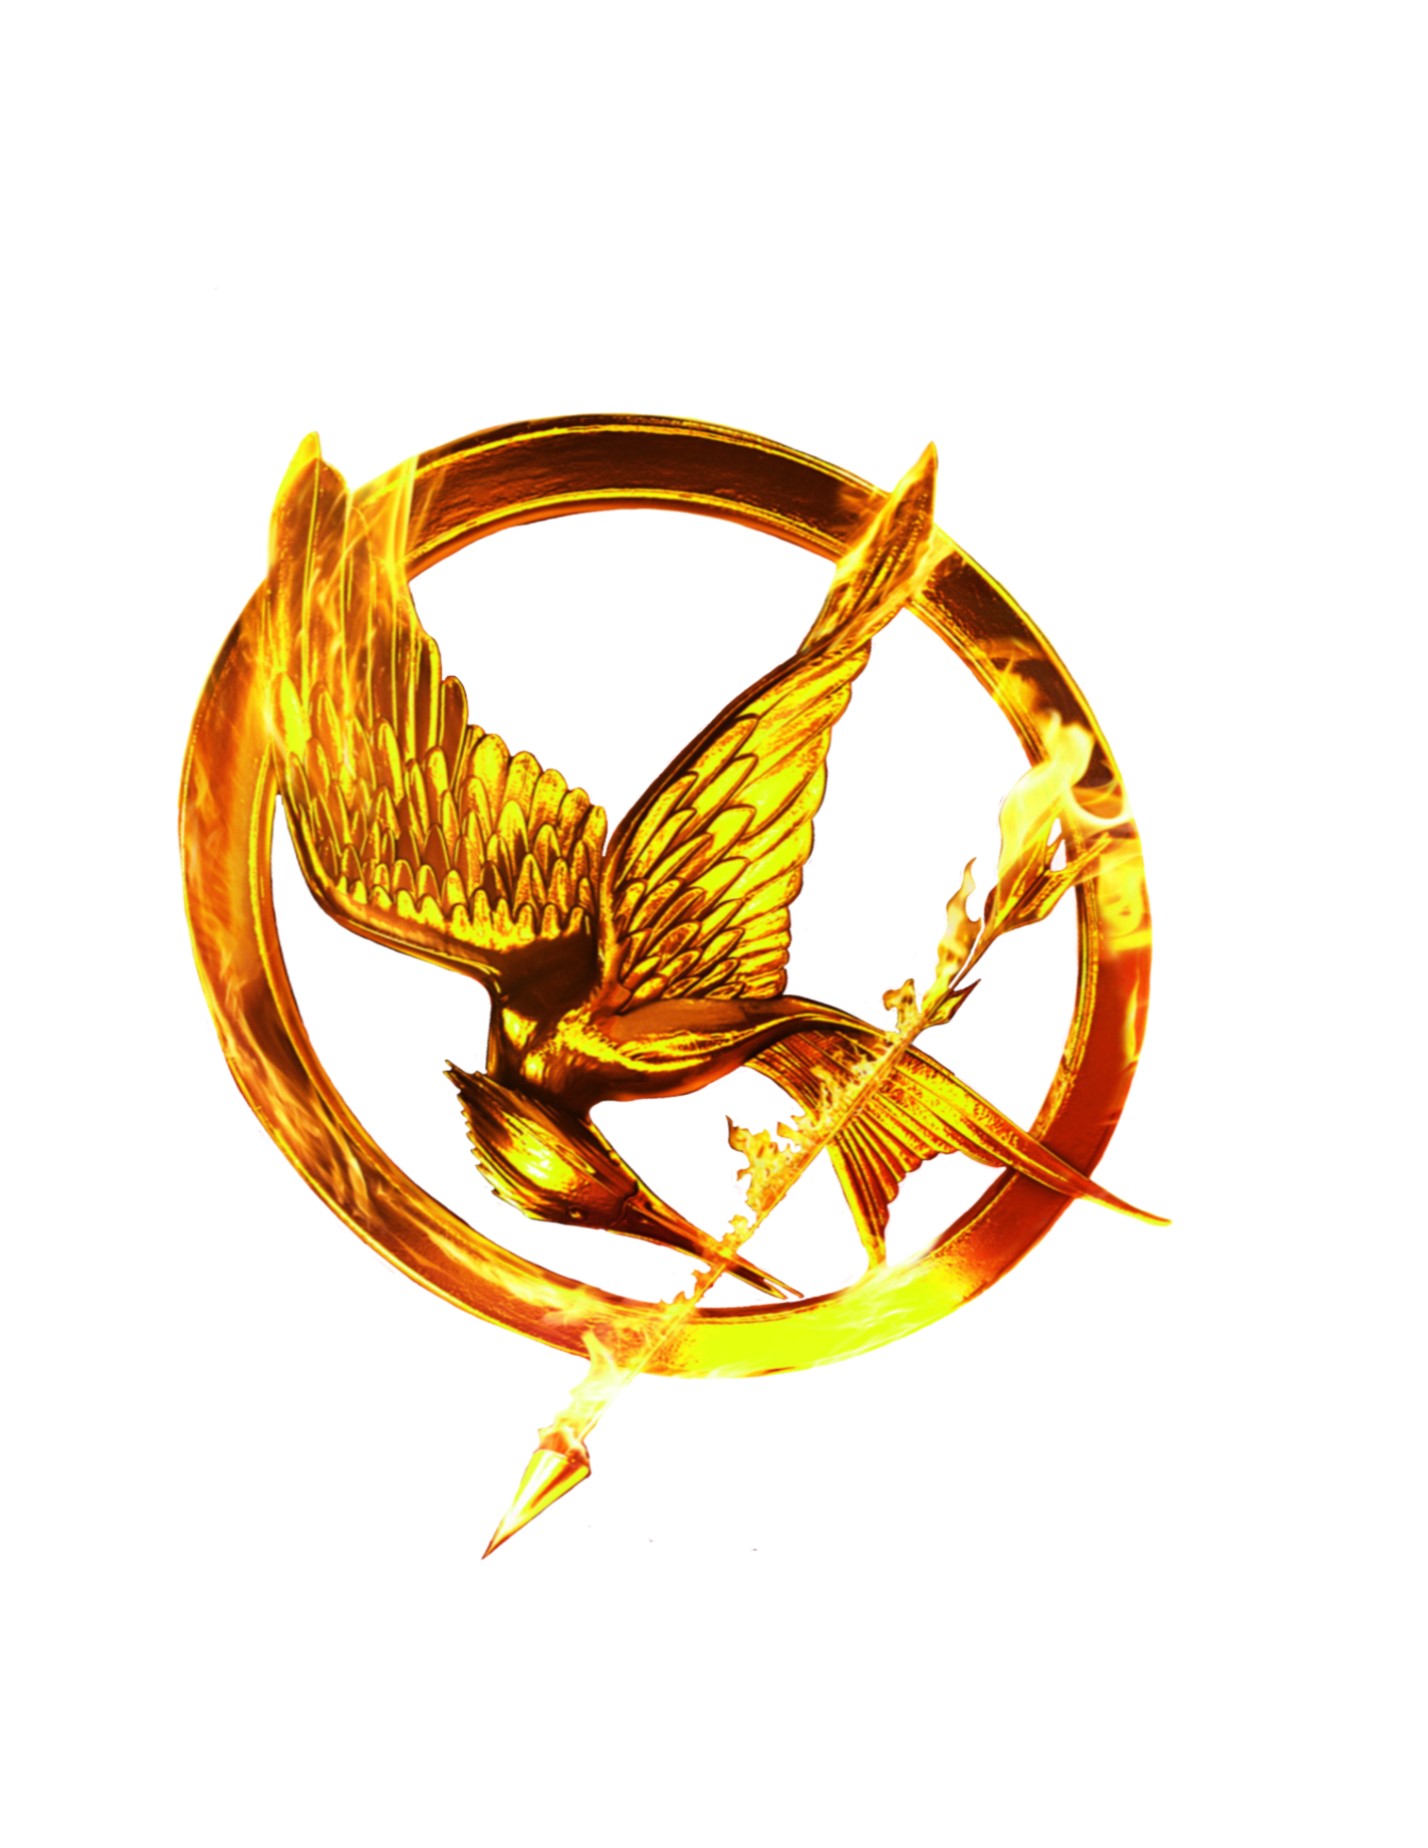 hunger games clip art free - photo #19